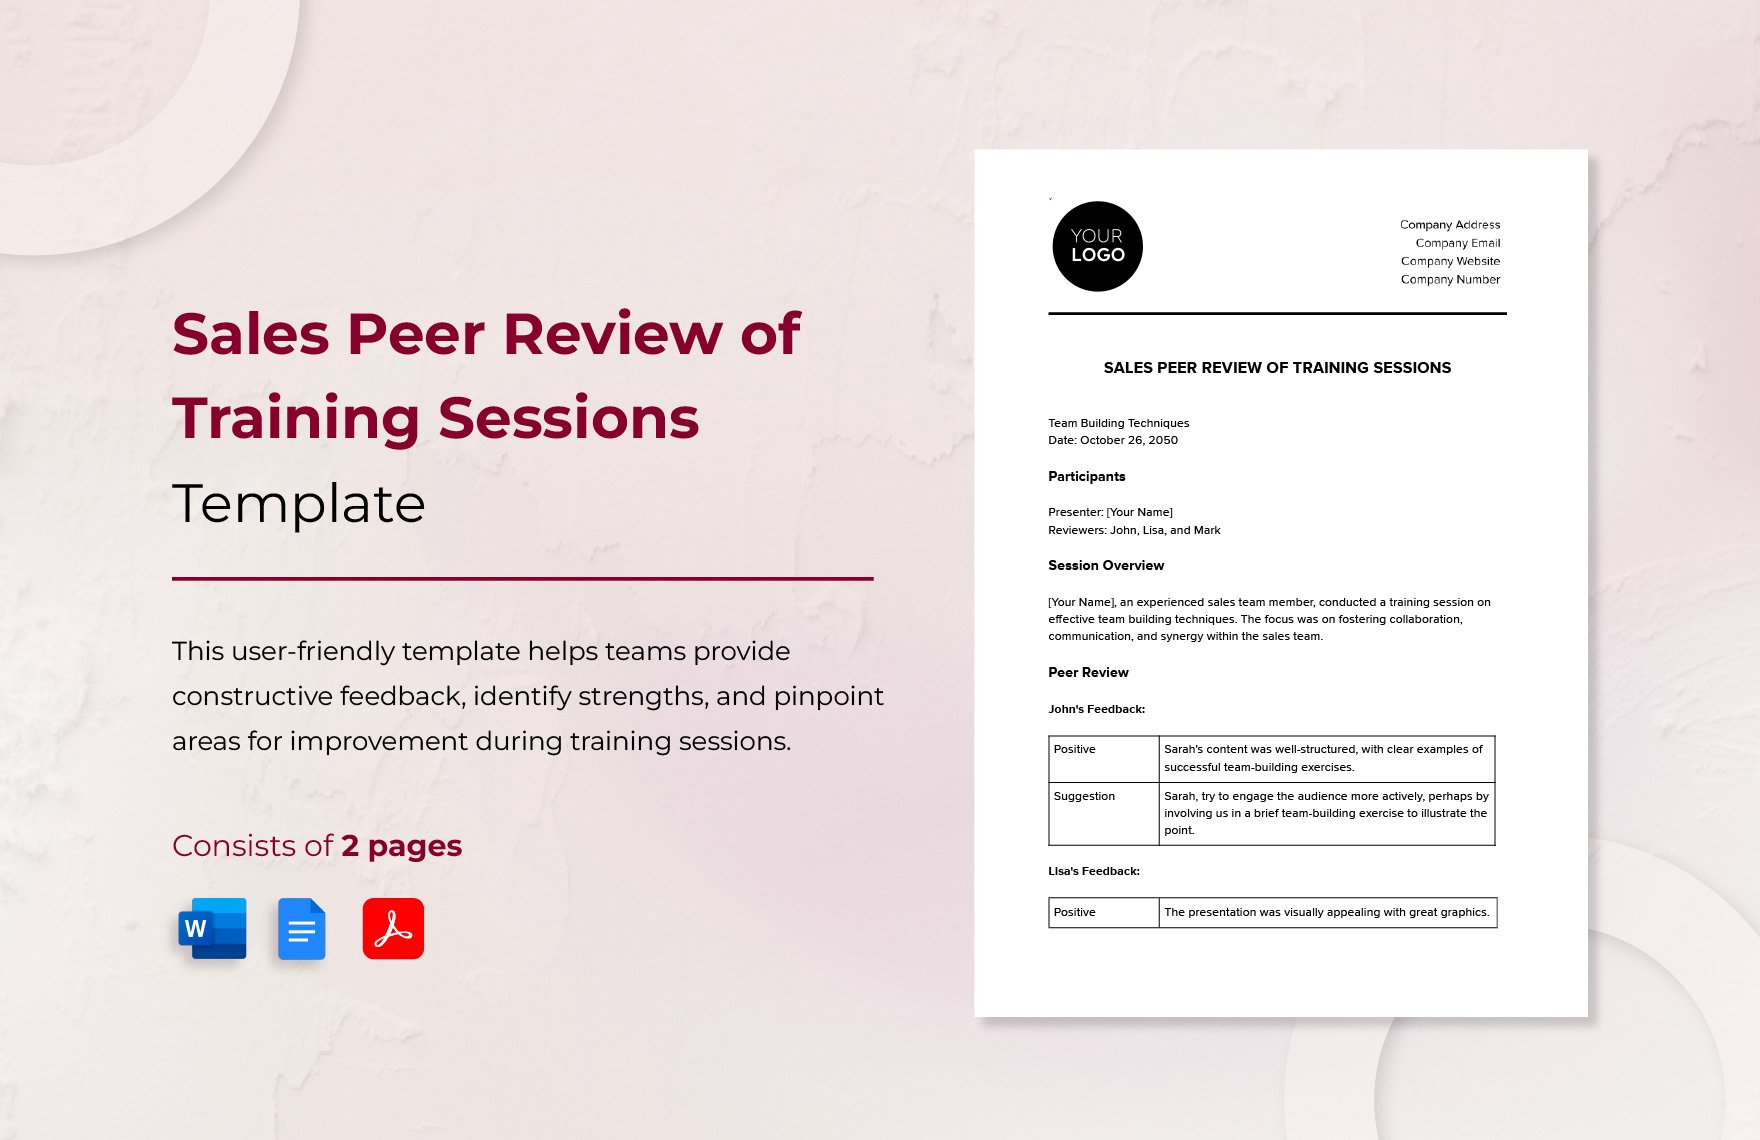 Sales Peer Review of Training Sessions Template